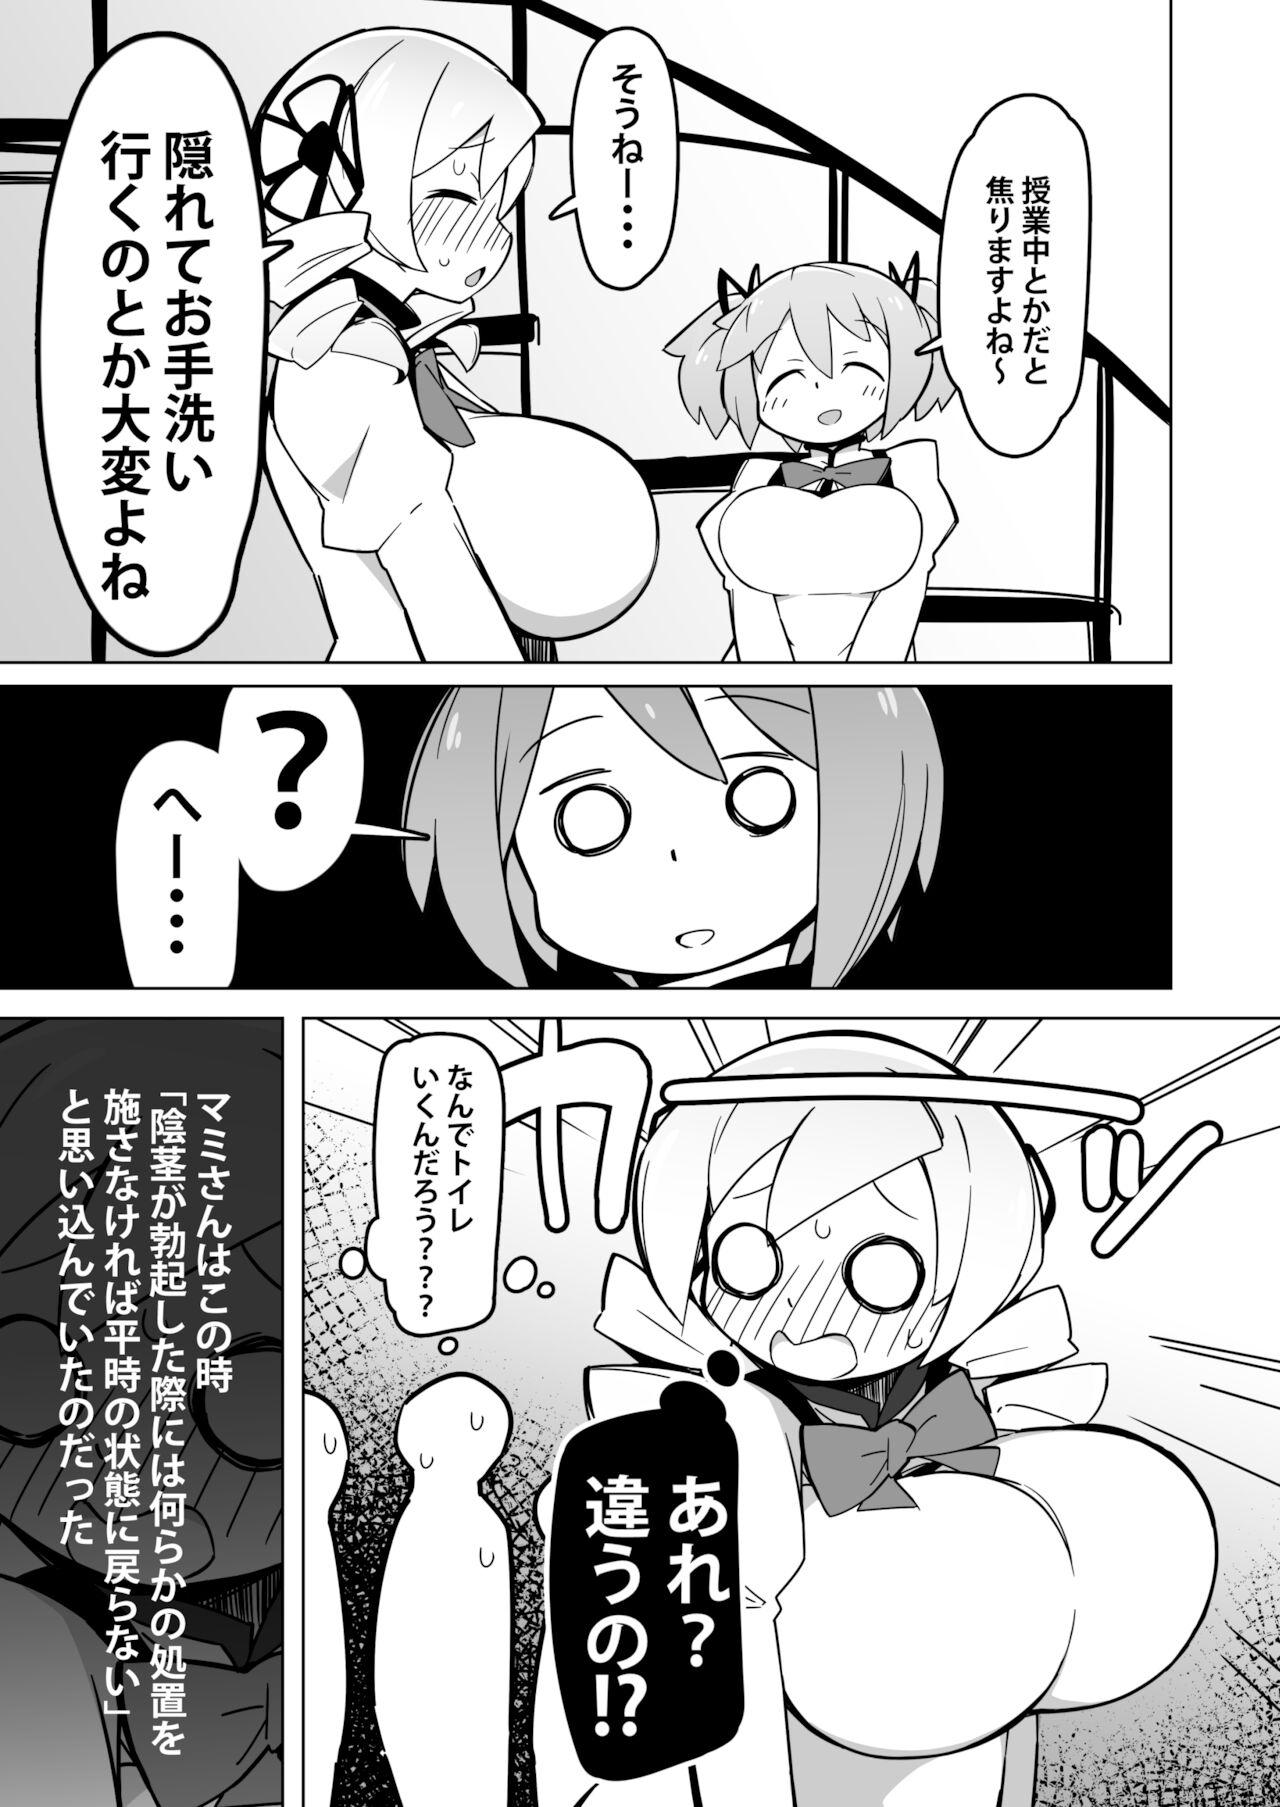 Soapy Massage Only Mami Doesn't Grow - Puella magi madoka magica First Time - Page 3